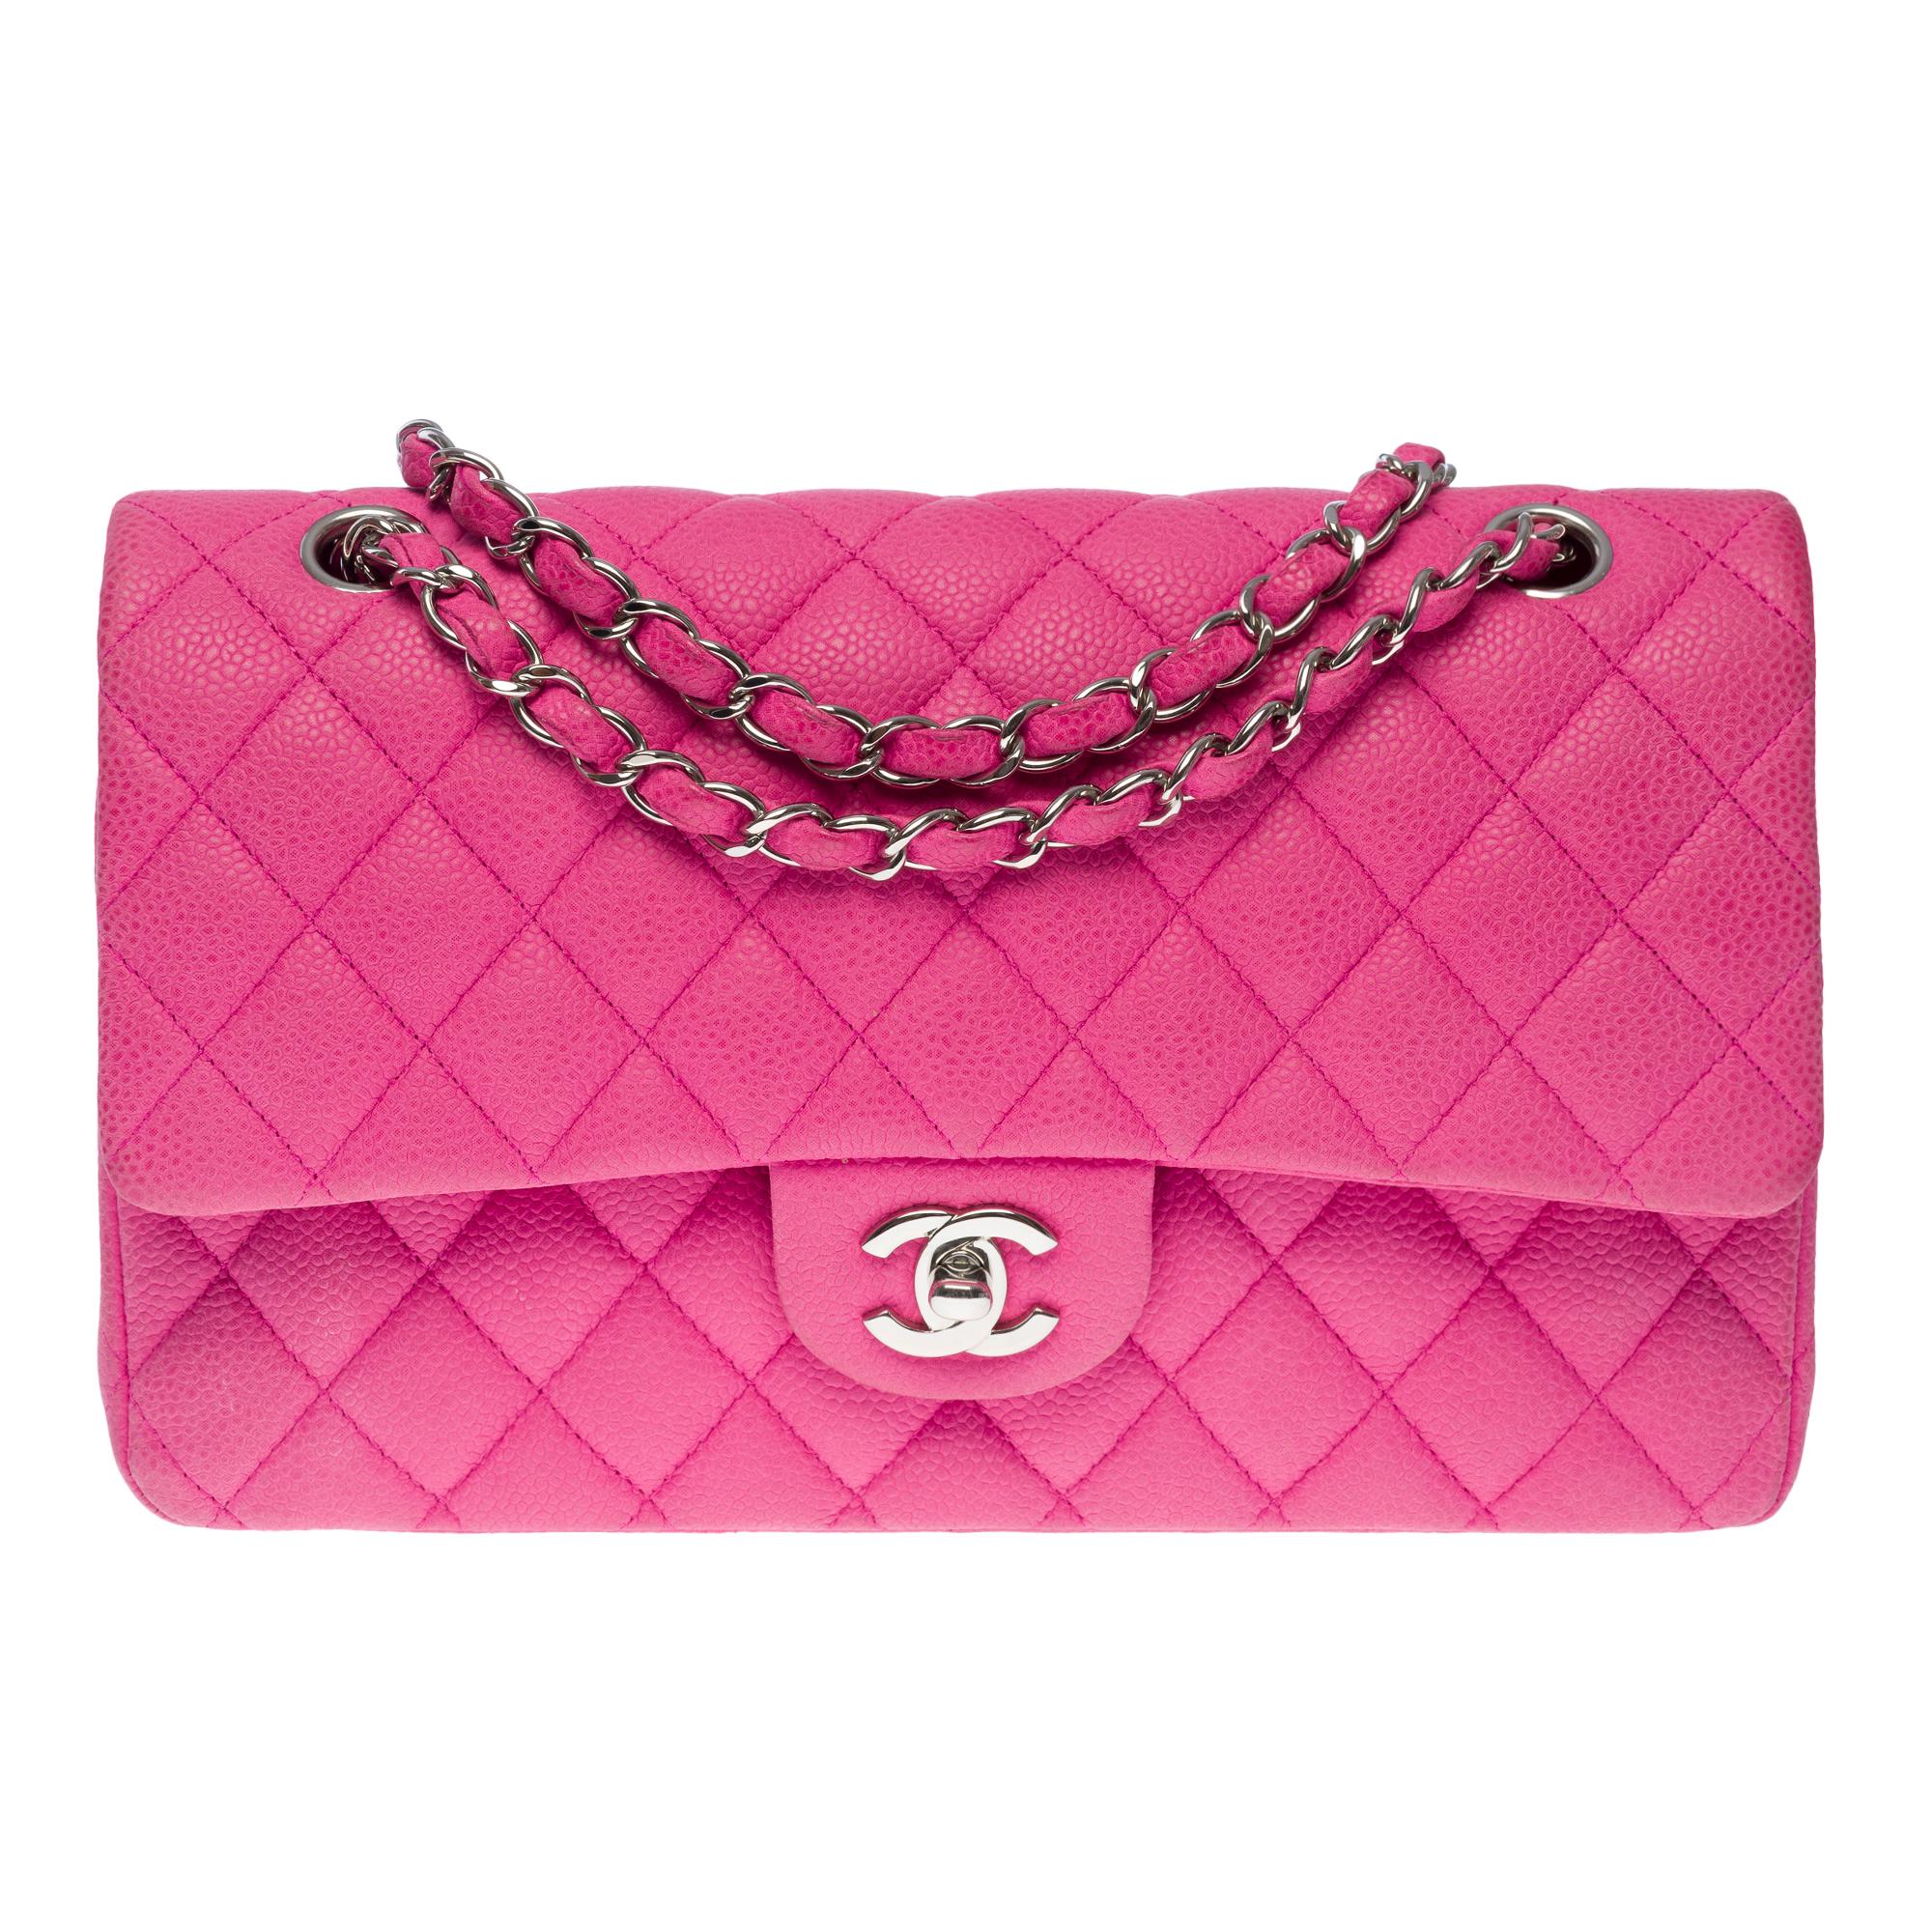 Amazing Chanel Timeless Medium 25 cm double flap shoulder bag in Pink quilted caviar leather, silver metal hardware, a silver metal chain handle intertwined with pink leather for carrying hand, shoulder or crossbody carry

Closure by flap in metal